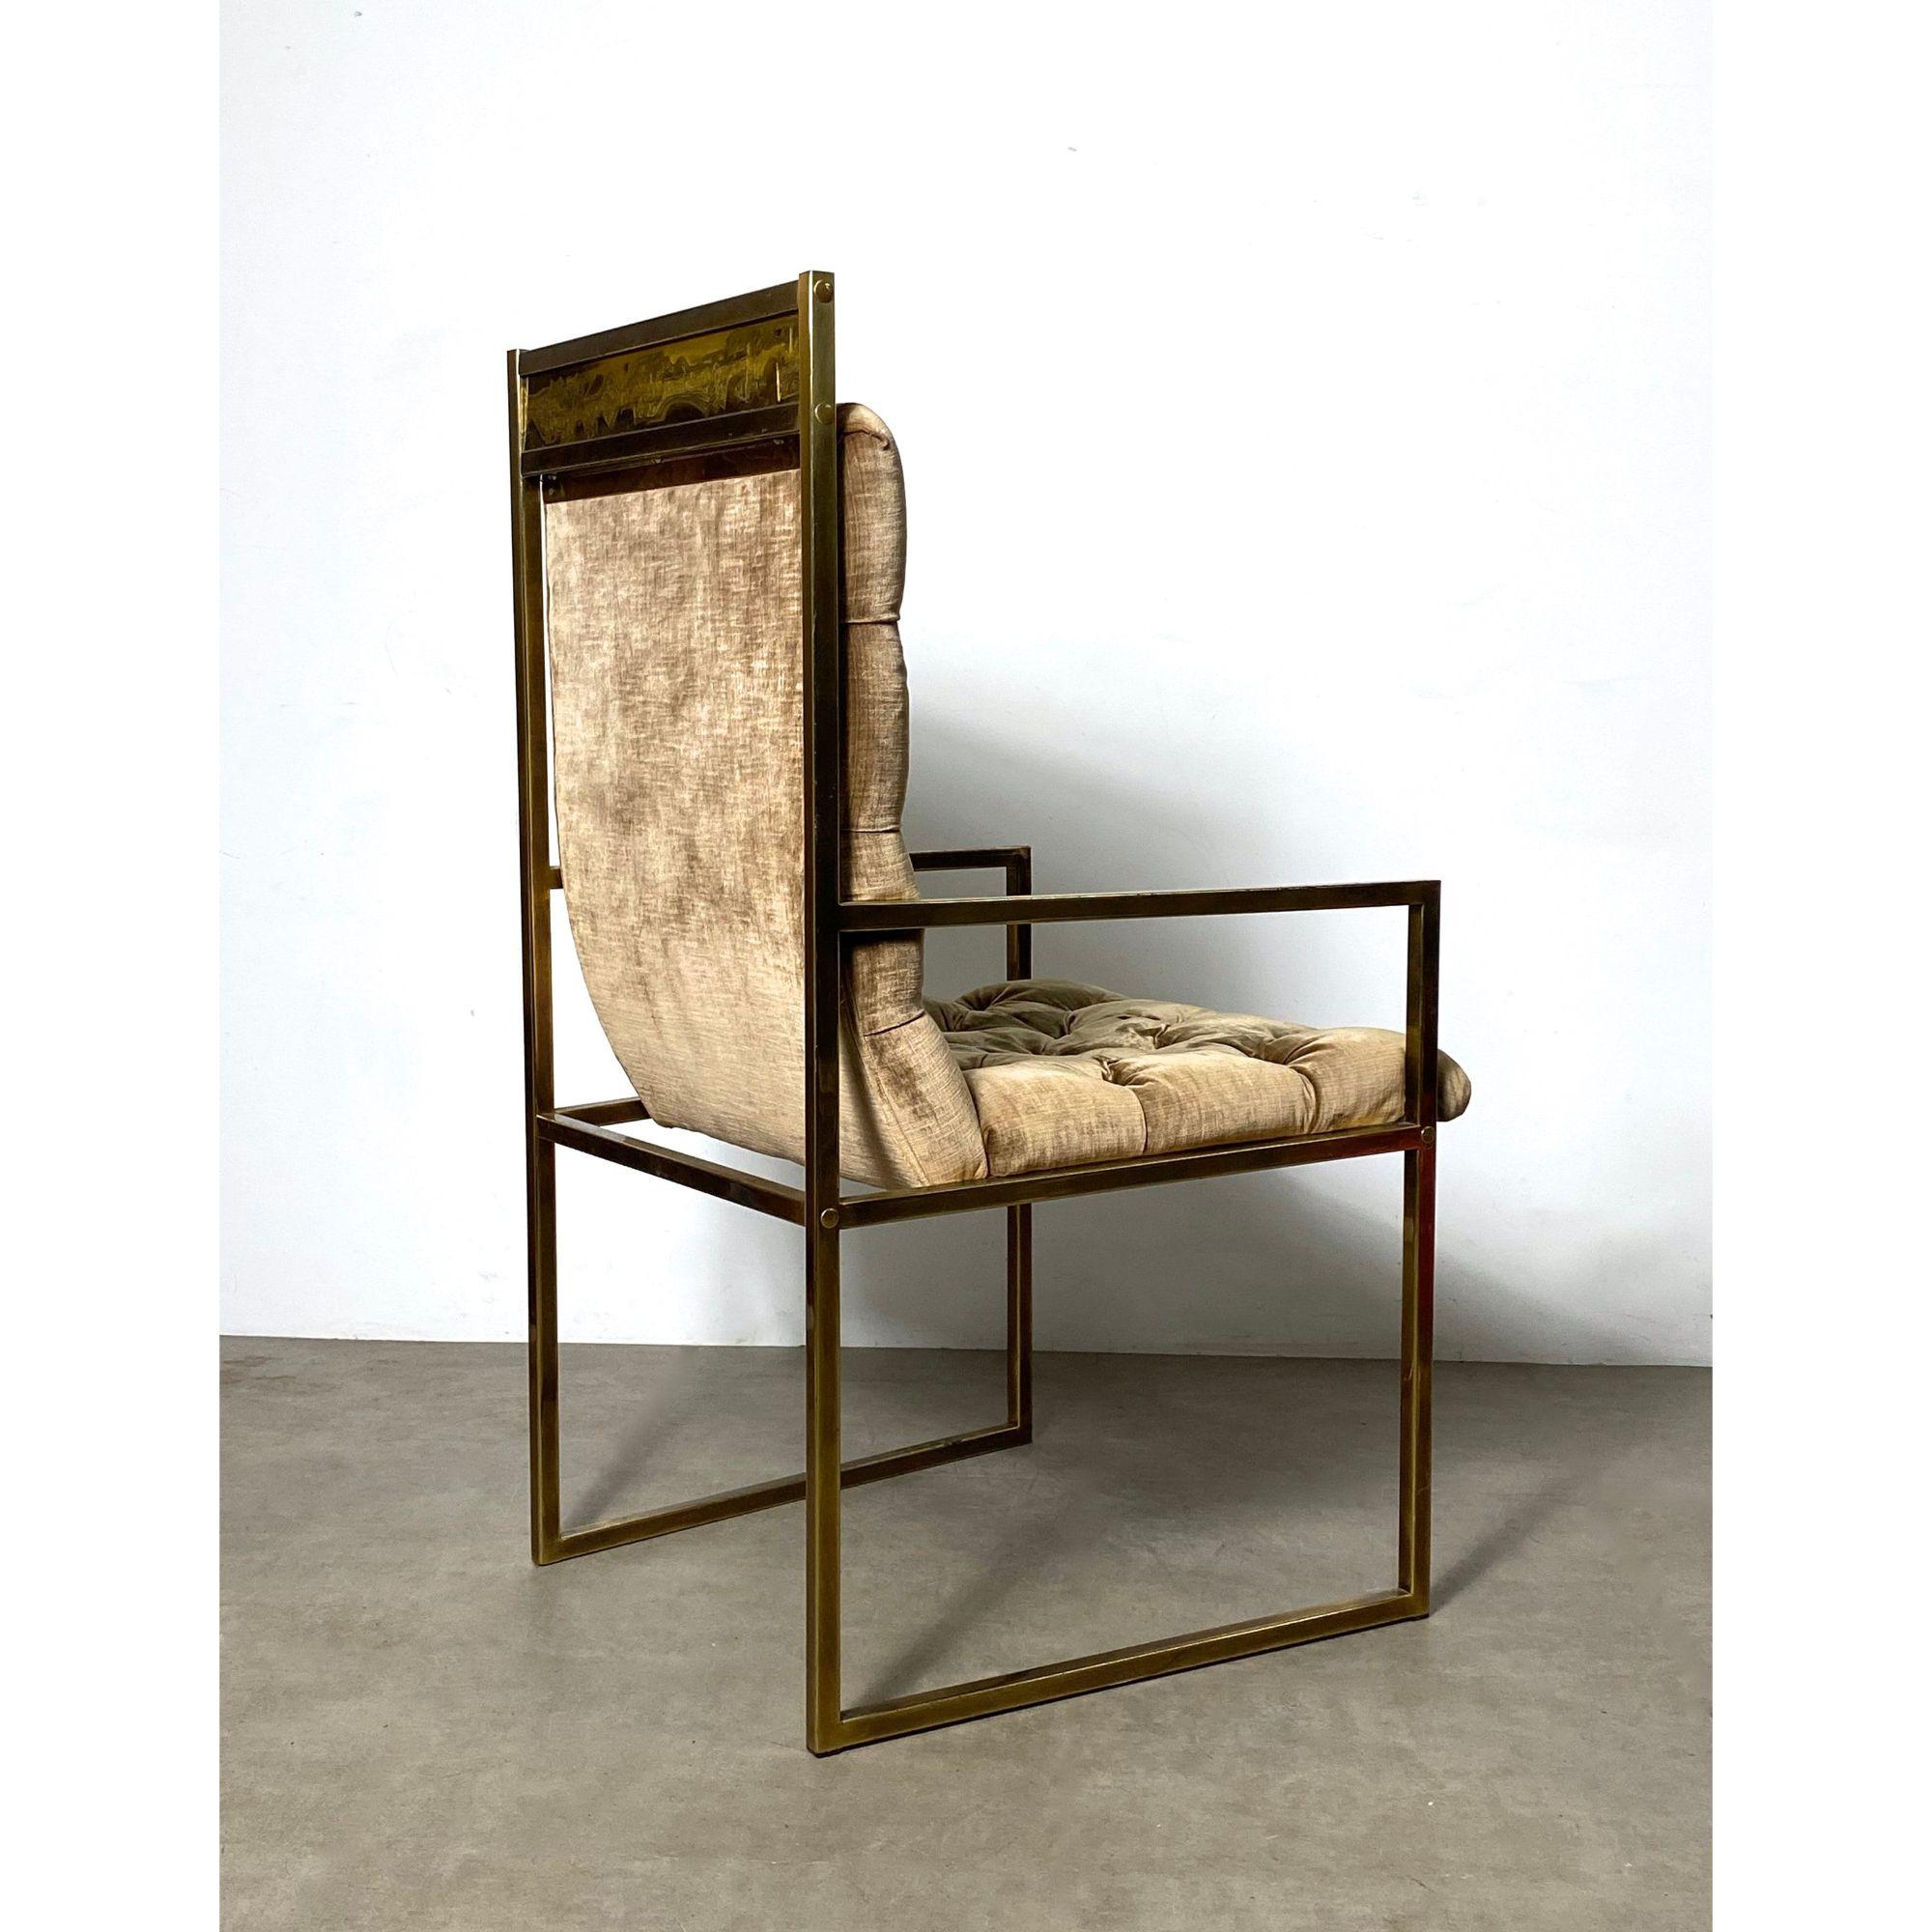 20th Century Mastercraft Acid Etched Armchair in Brass by Bernhard Rohne, circa 1970's For Sale